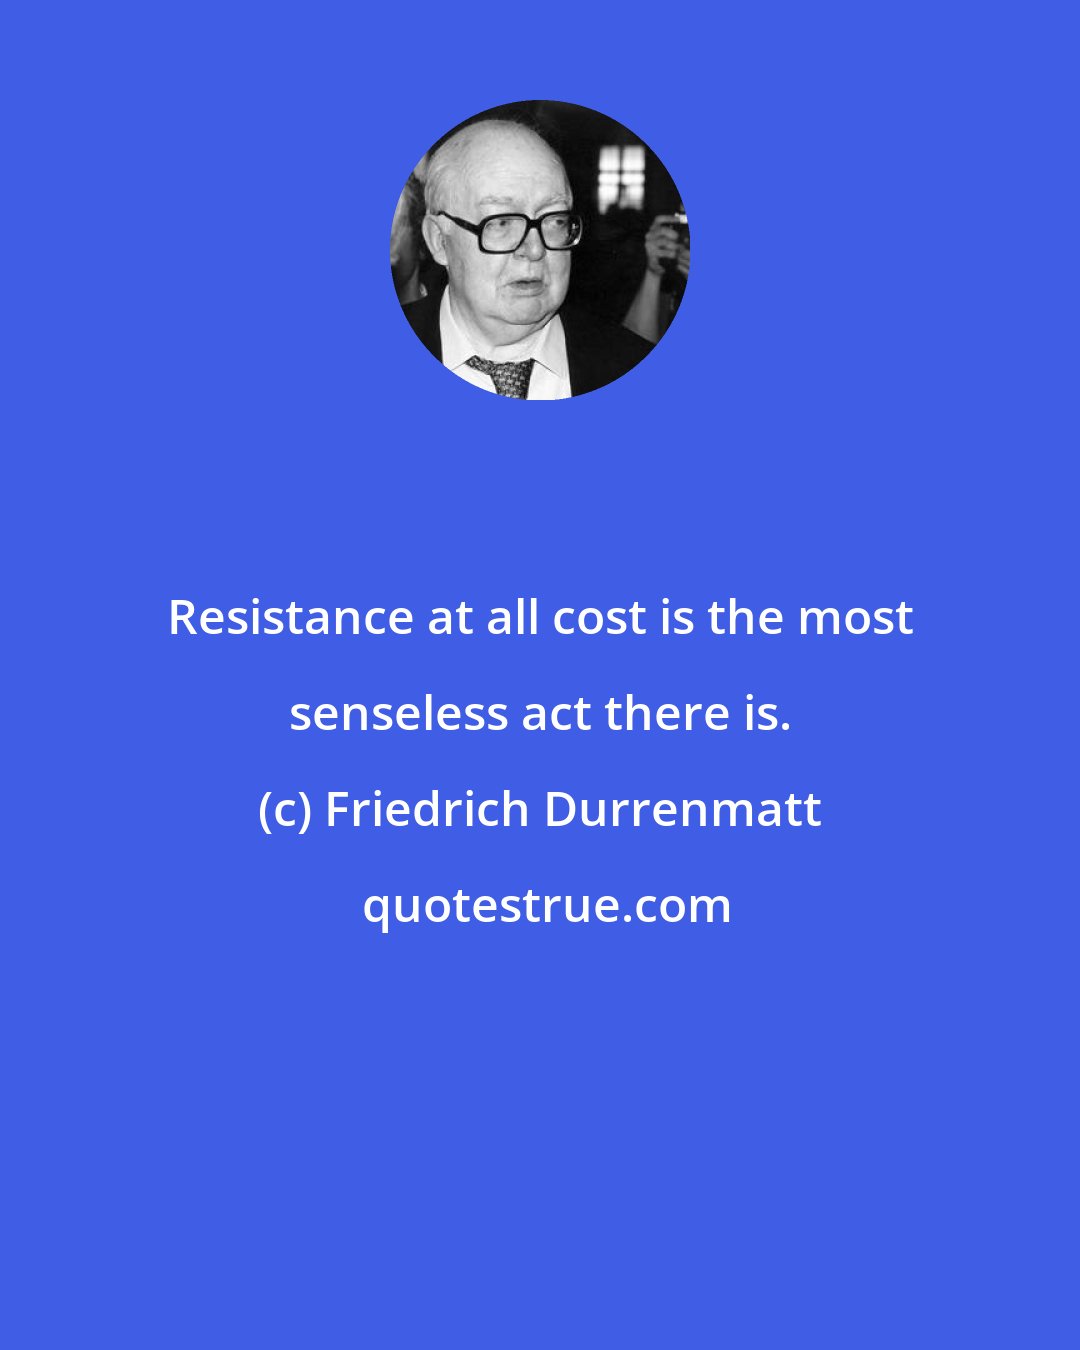 Friedrich Durrenmatt: Resistance at all cost is the most senseless act there is.